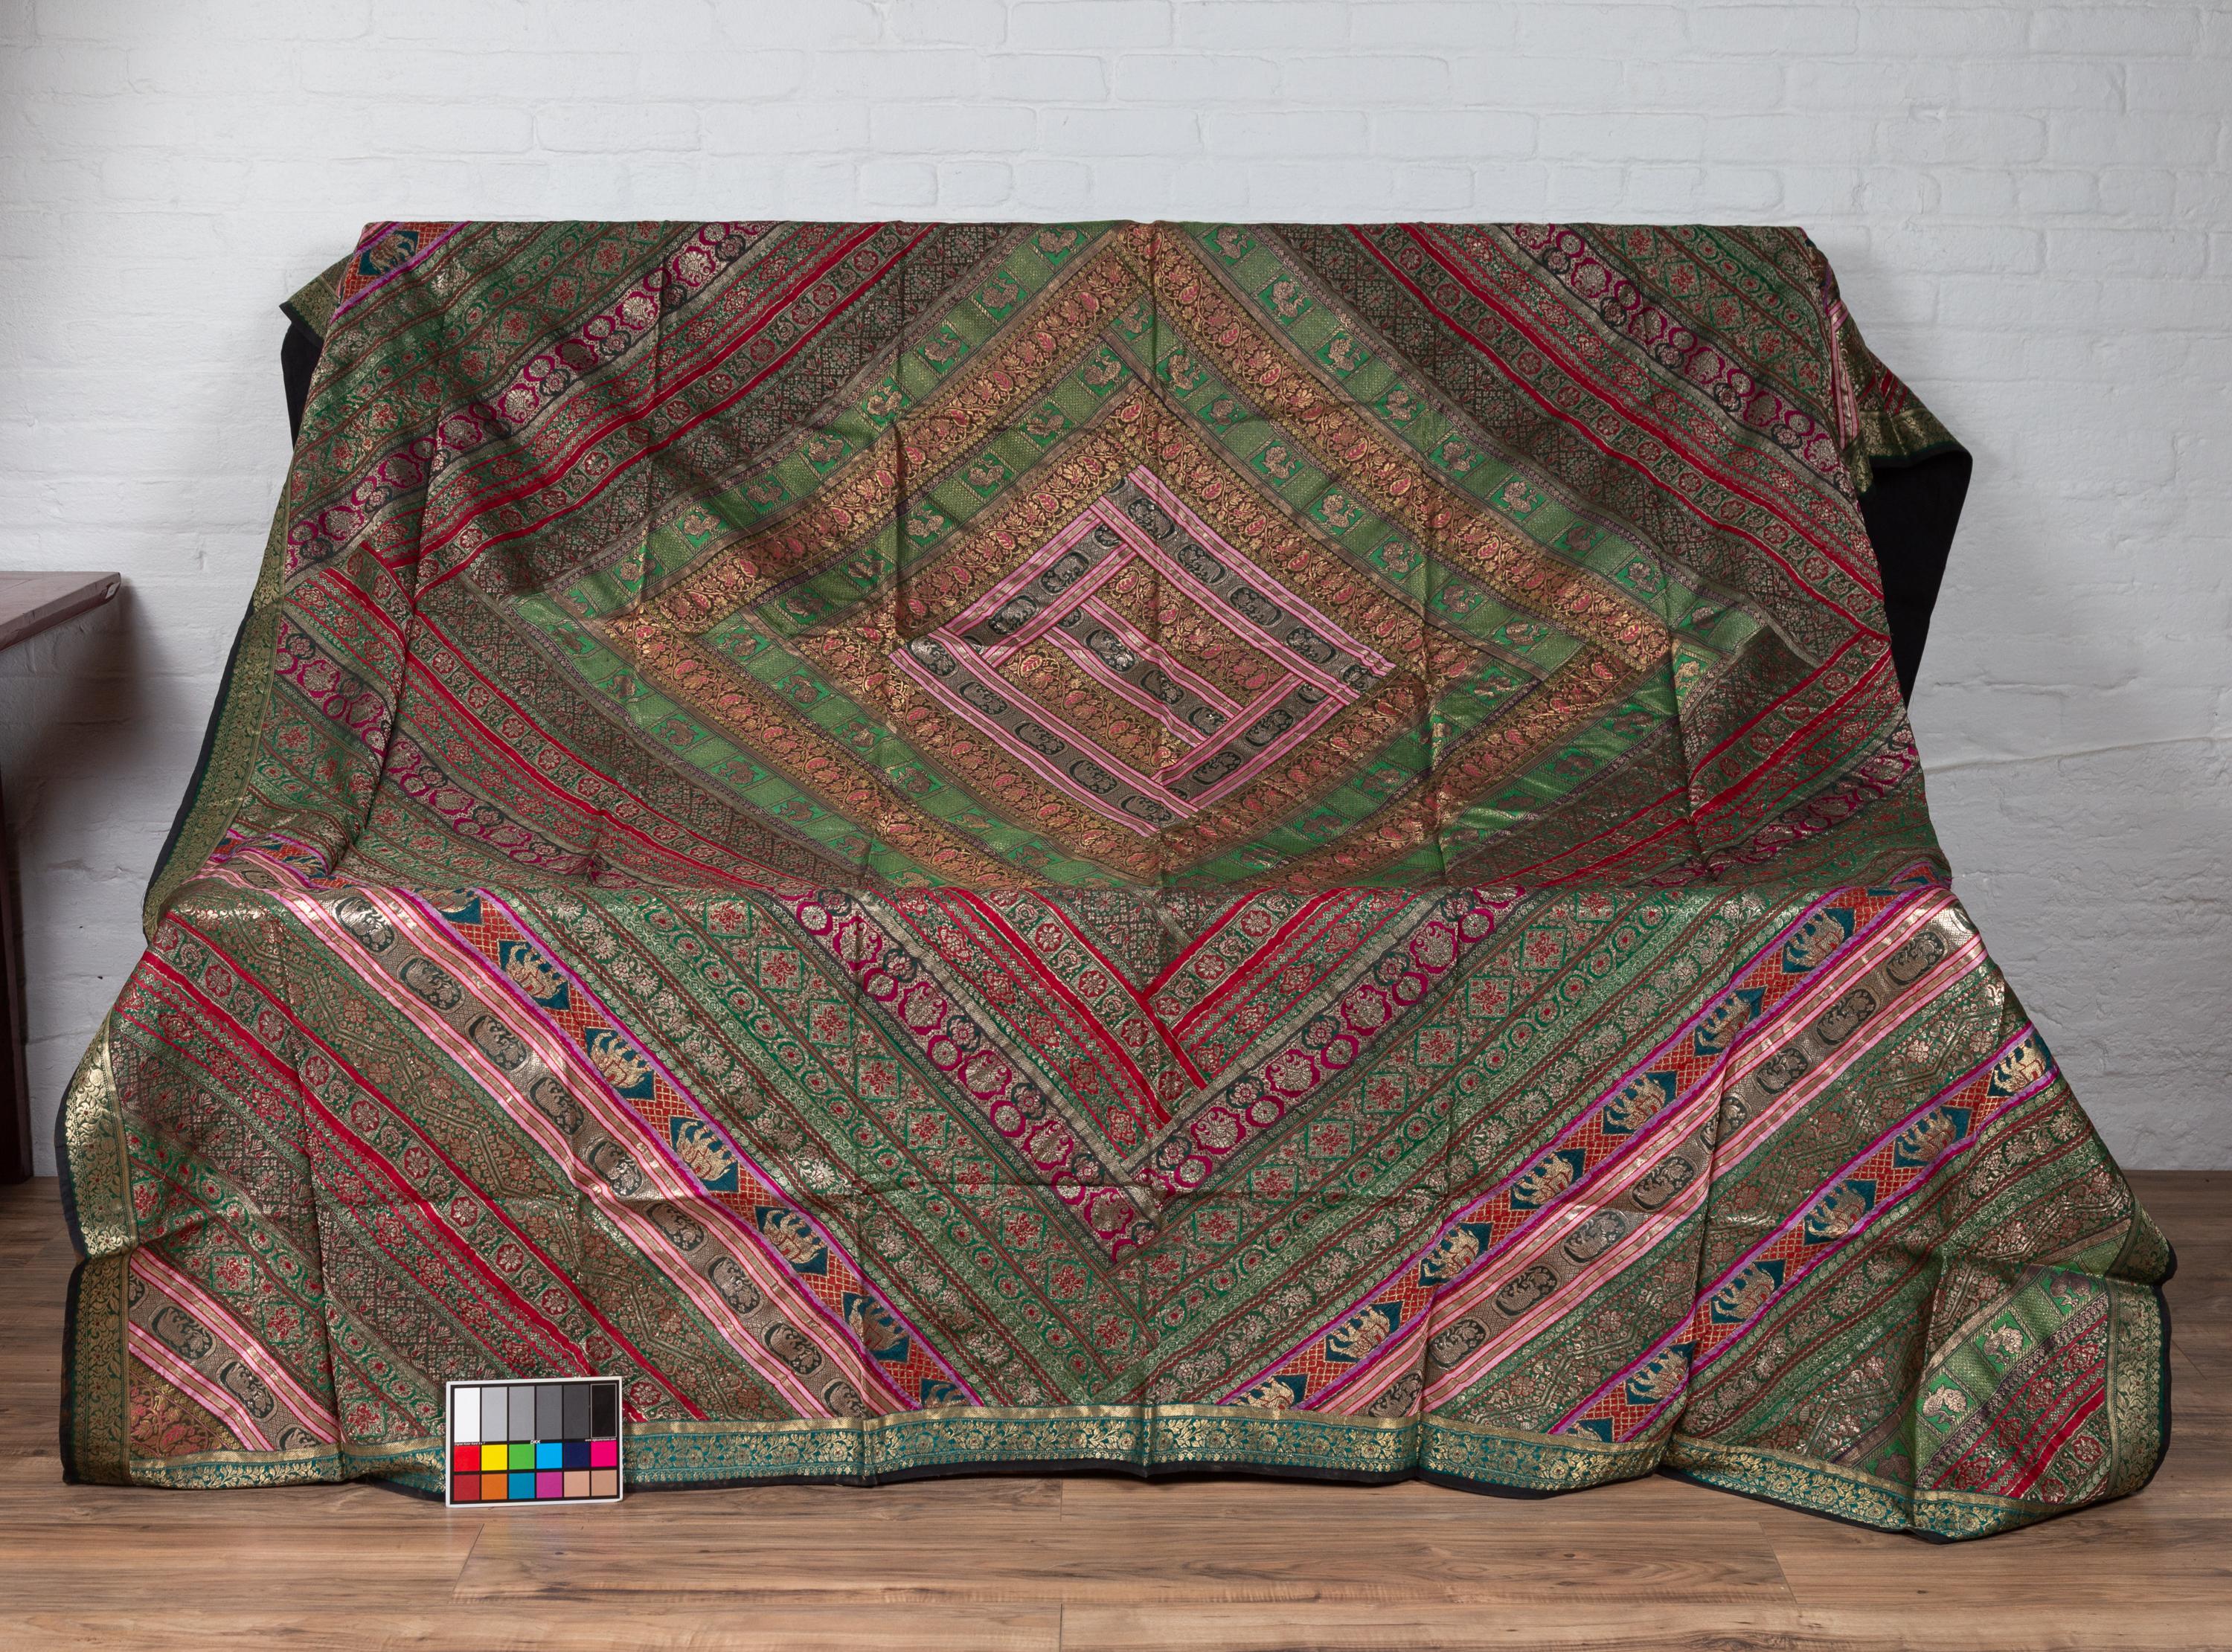 Vintage Indian Silk Embroidered Fabric with Green, Red, Fuchsia and Golden Tones 12